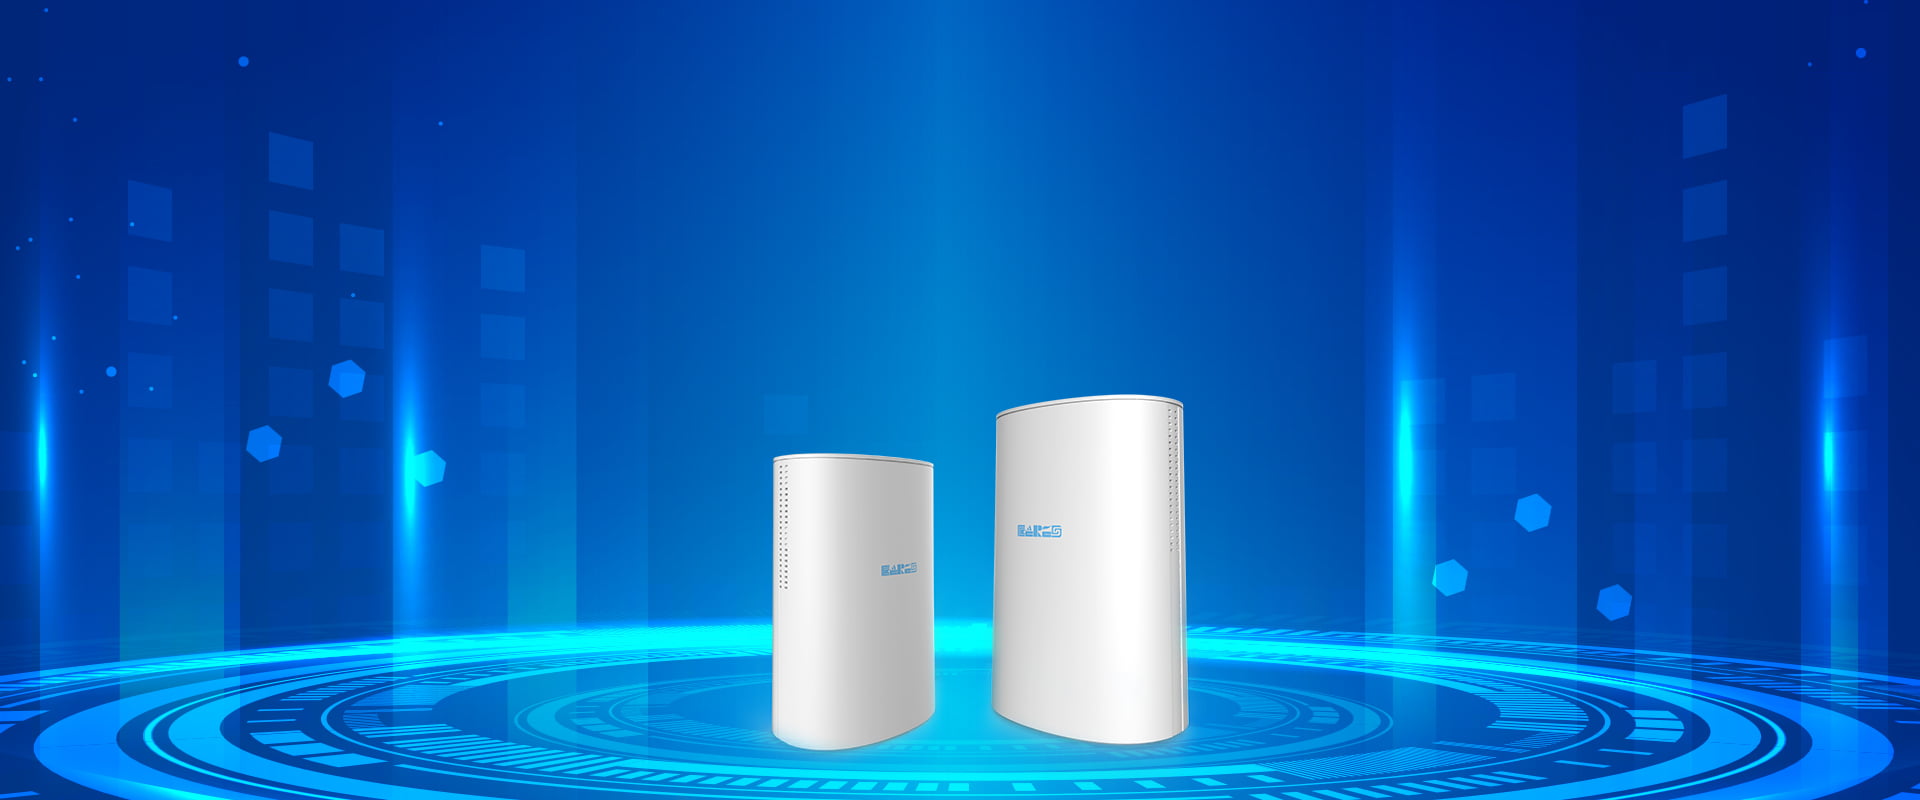 Wi-Fi 5 AC1200 Mesh Router WR625G